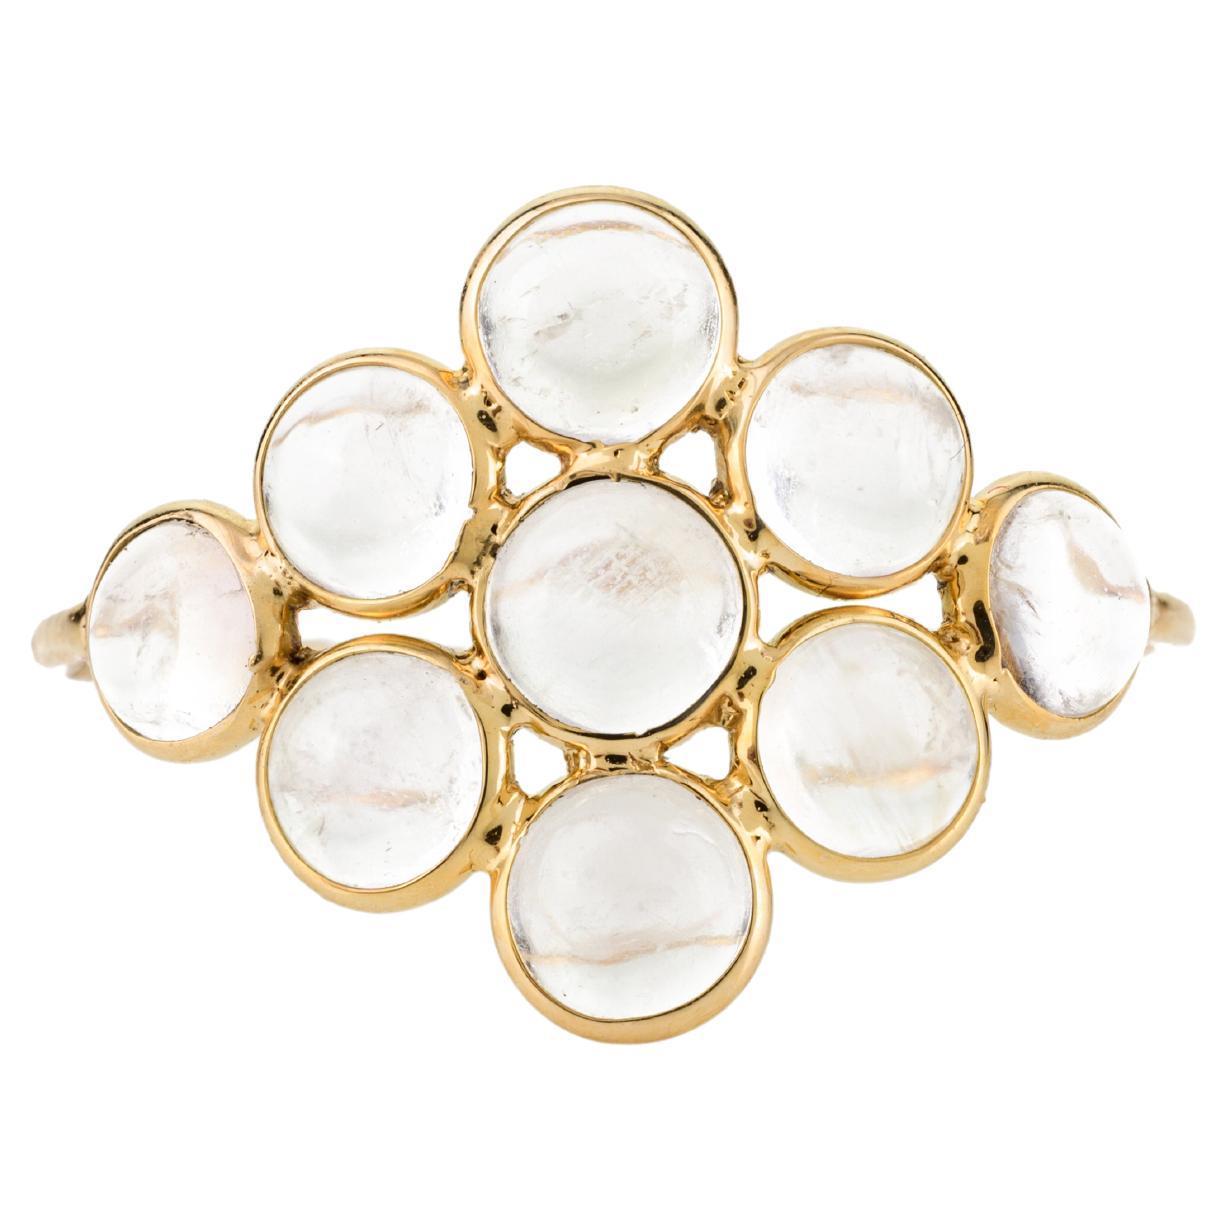 Everyday Rainbow Moonstone Cluster Ring in 18k Solid Yellow Gold